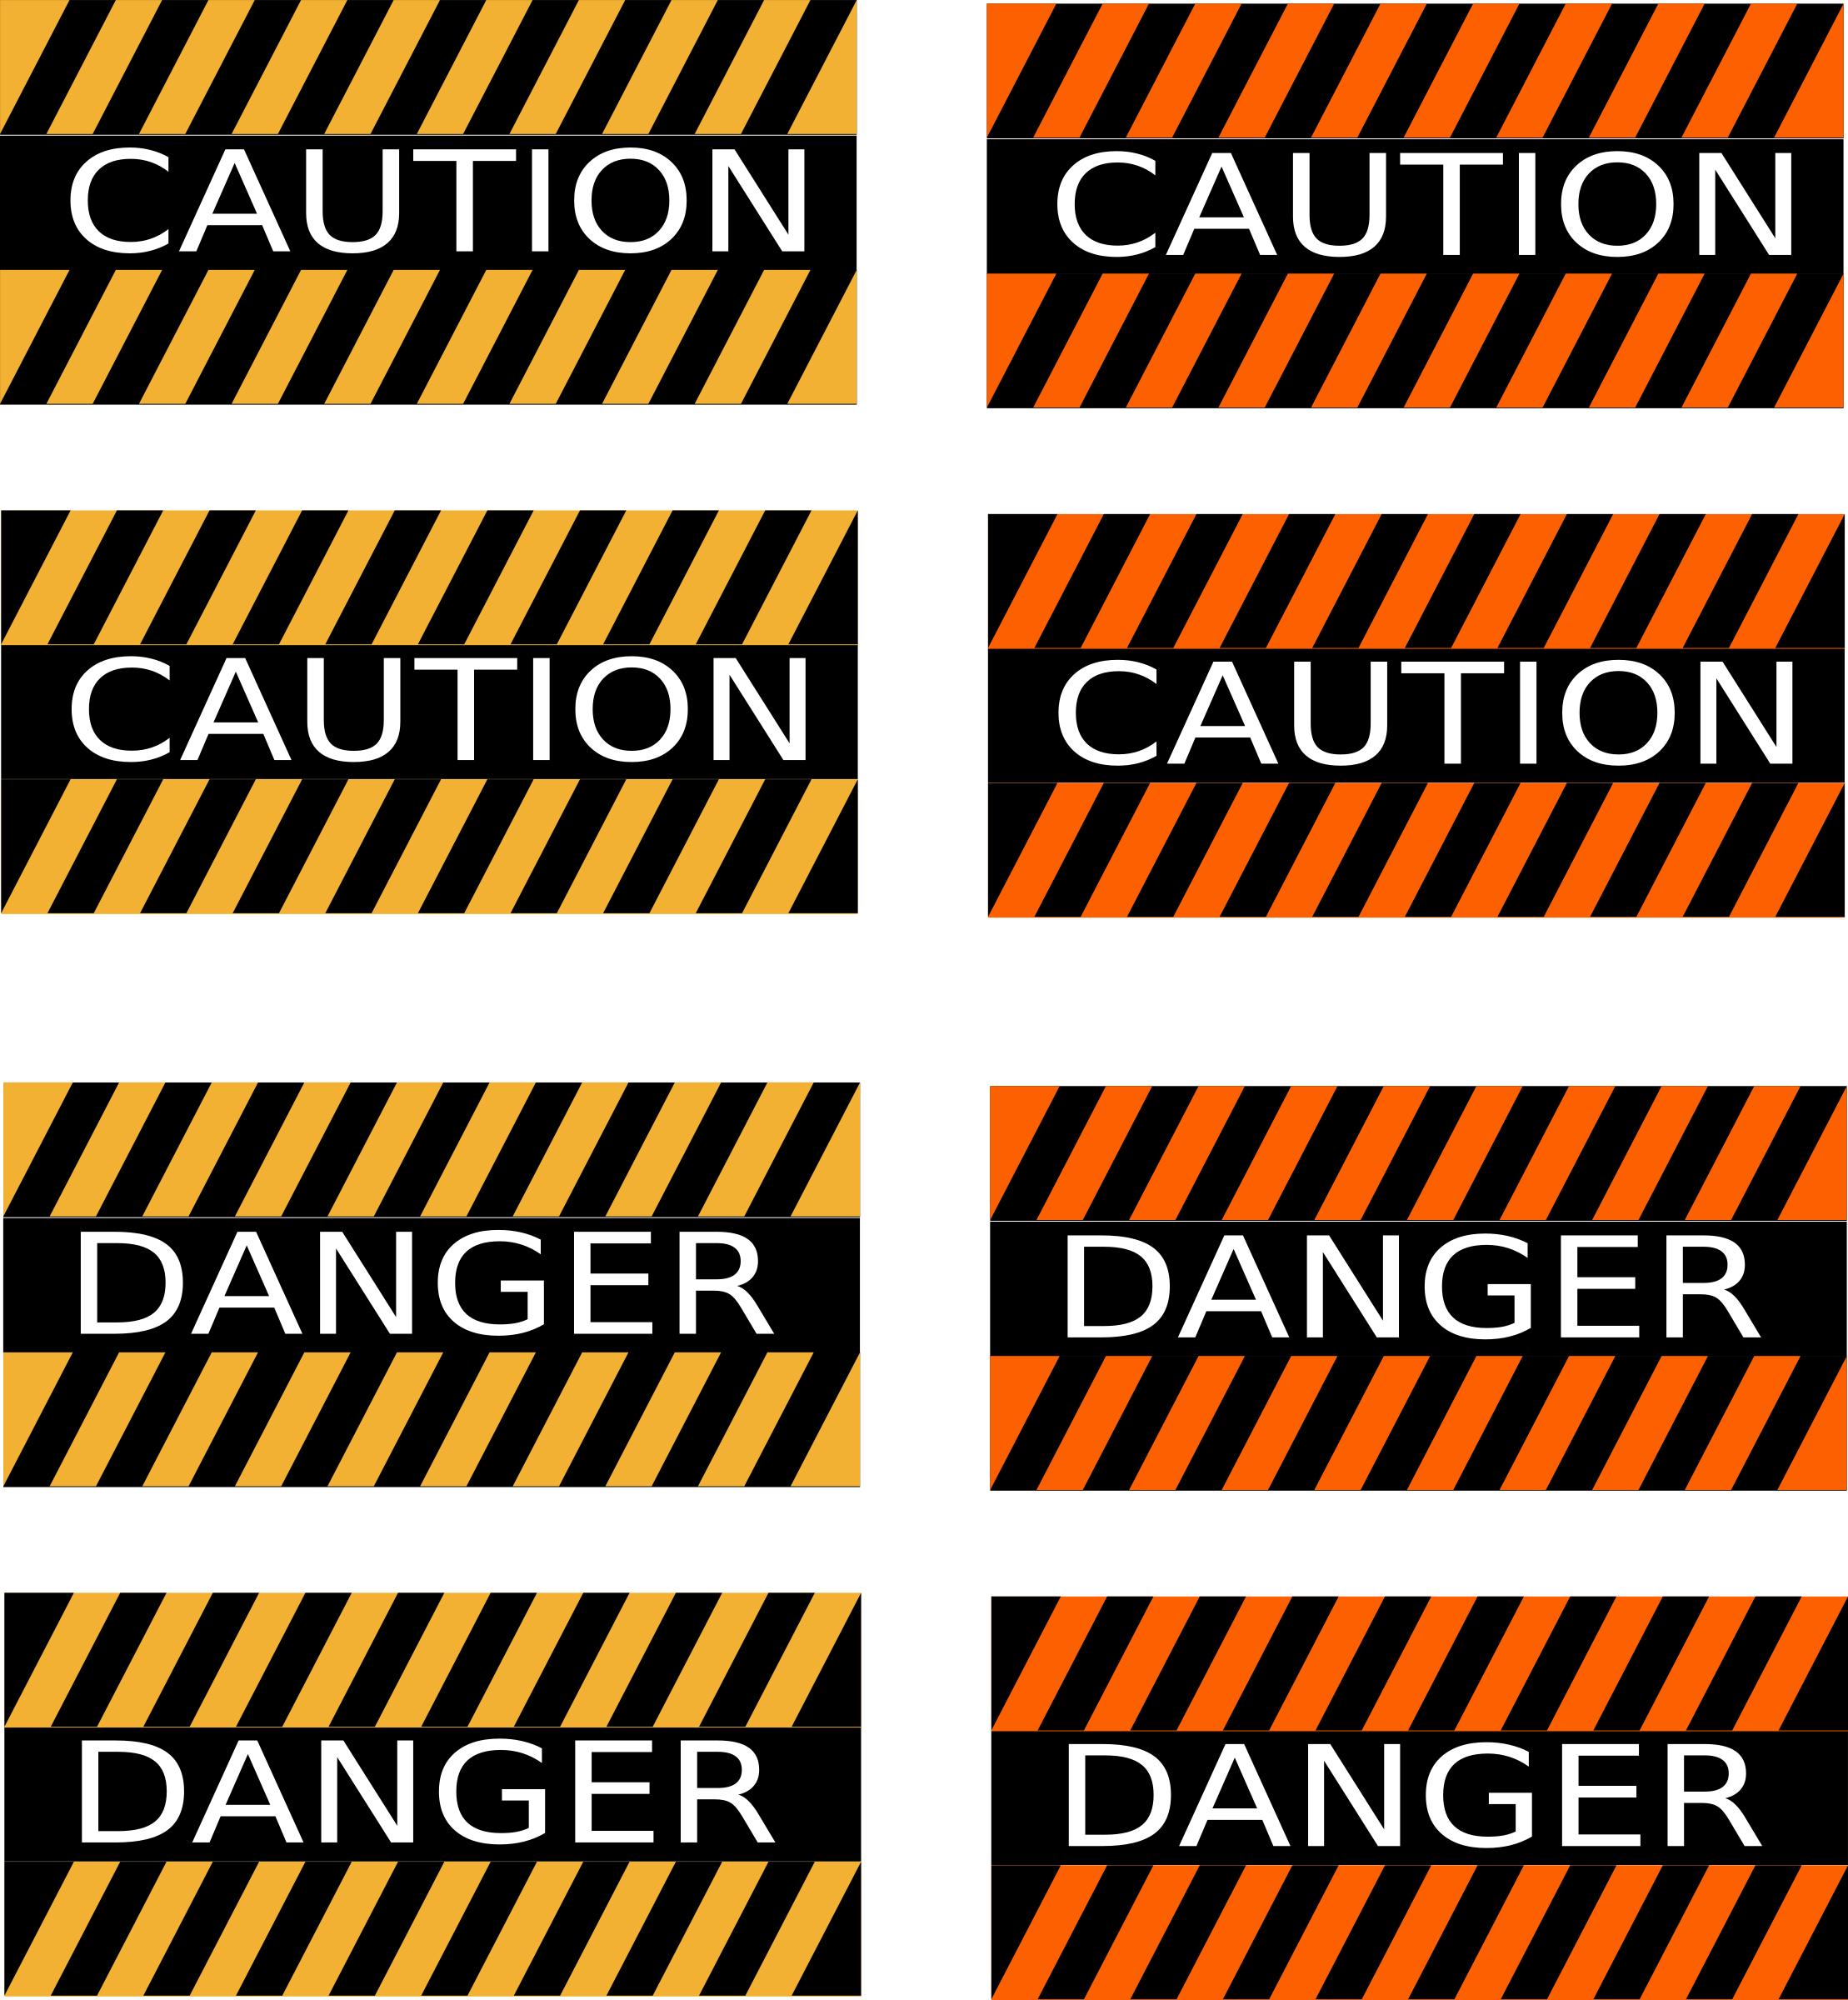 Caution and Danger Signs png